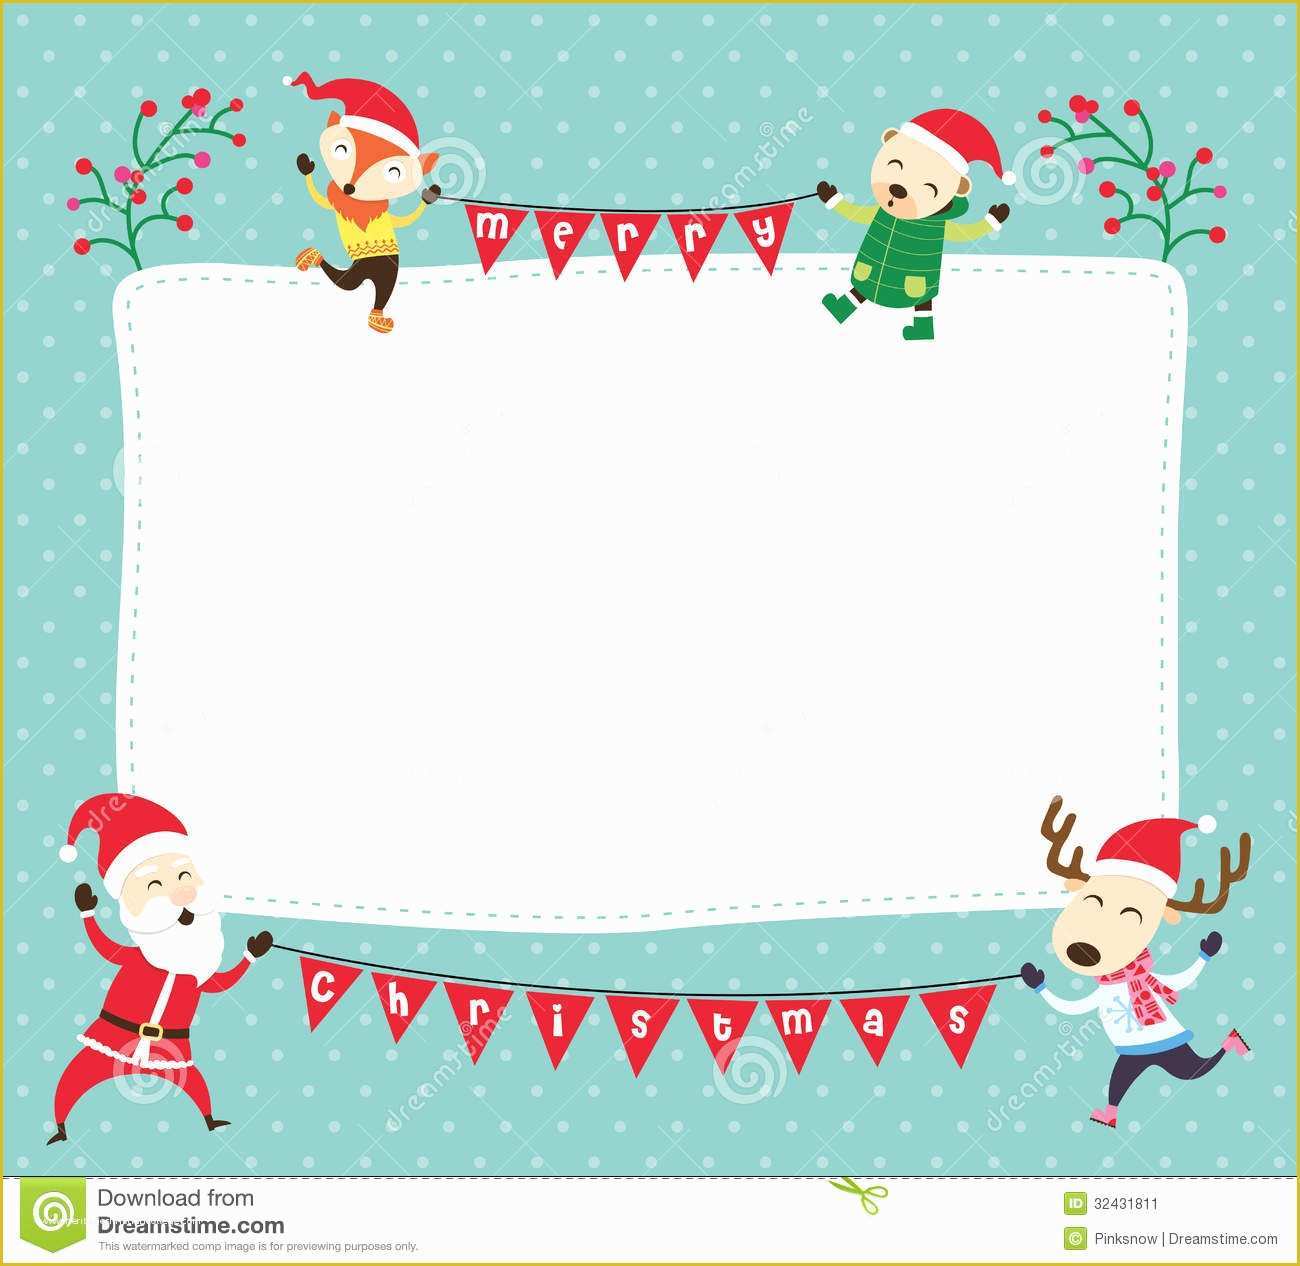 Free Christmas Photo Card Templates Online Of Christmas Card Template Stock Image Image